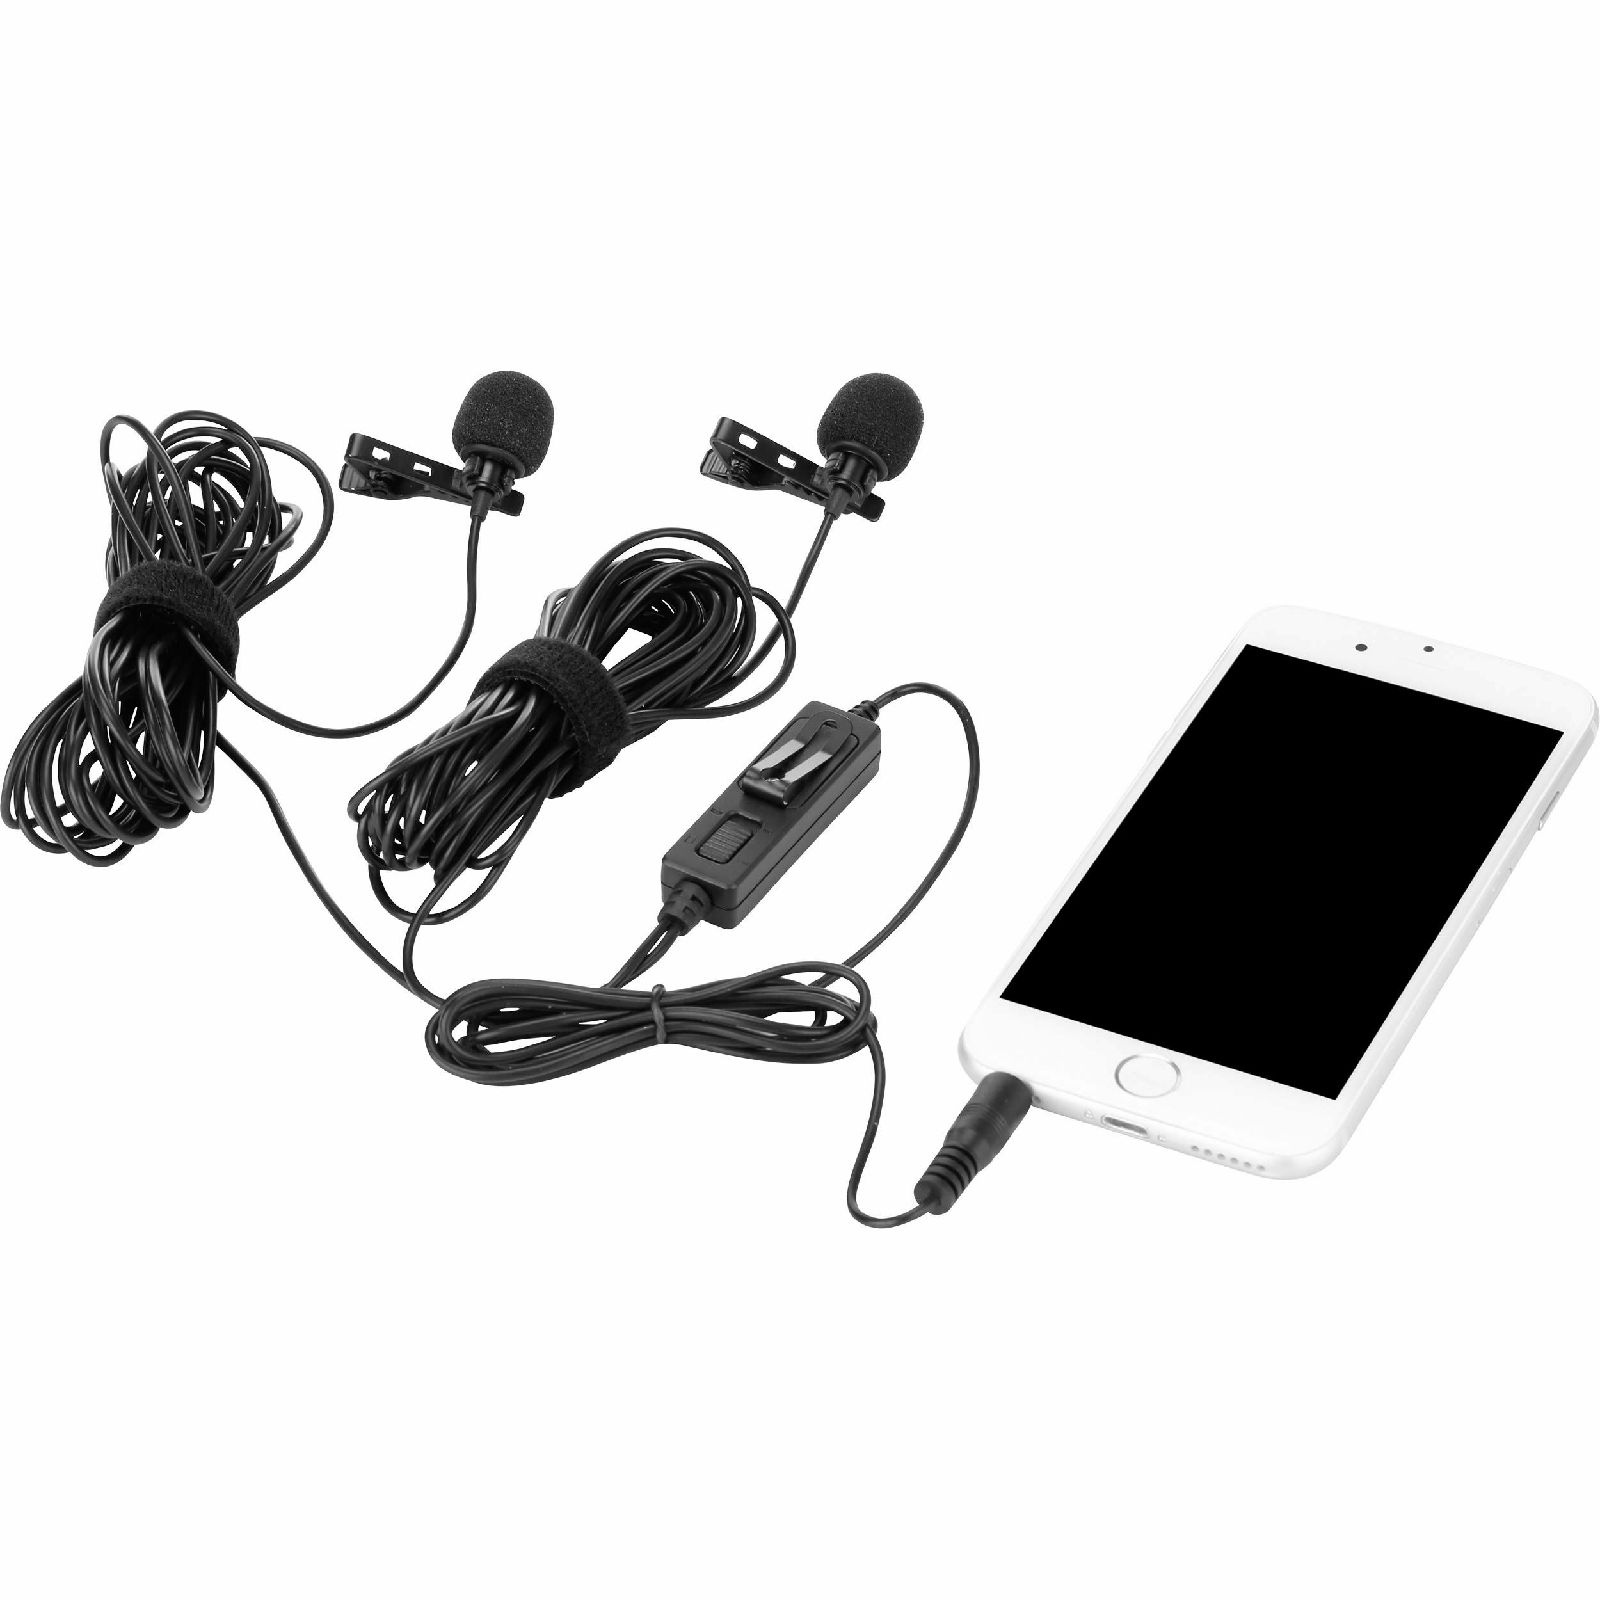 Saramonic LavMicro 2M Lavalier Microphone with 2 Microphone Capsules and Mic clips for DSLR Camera, Camcorder,Smartphone and Audio Recorder